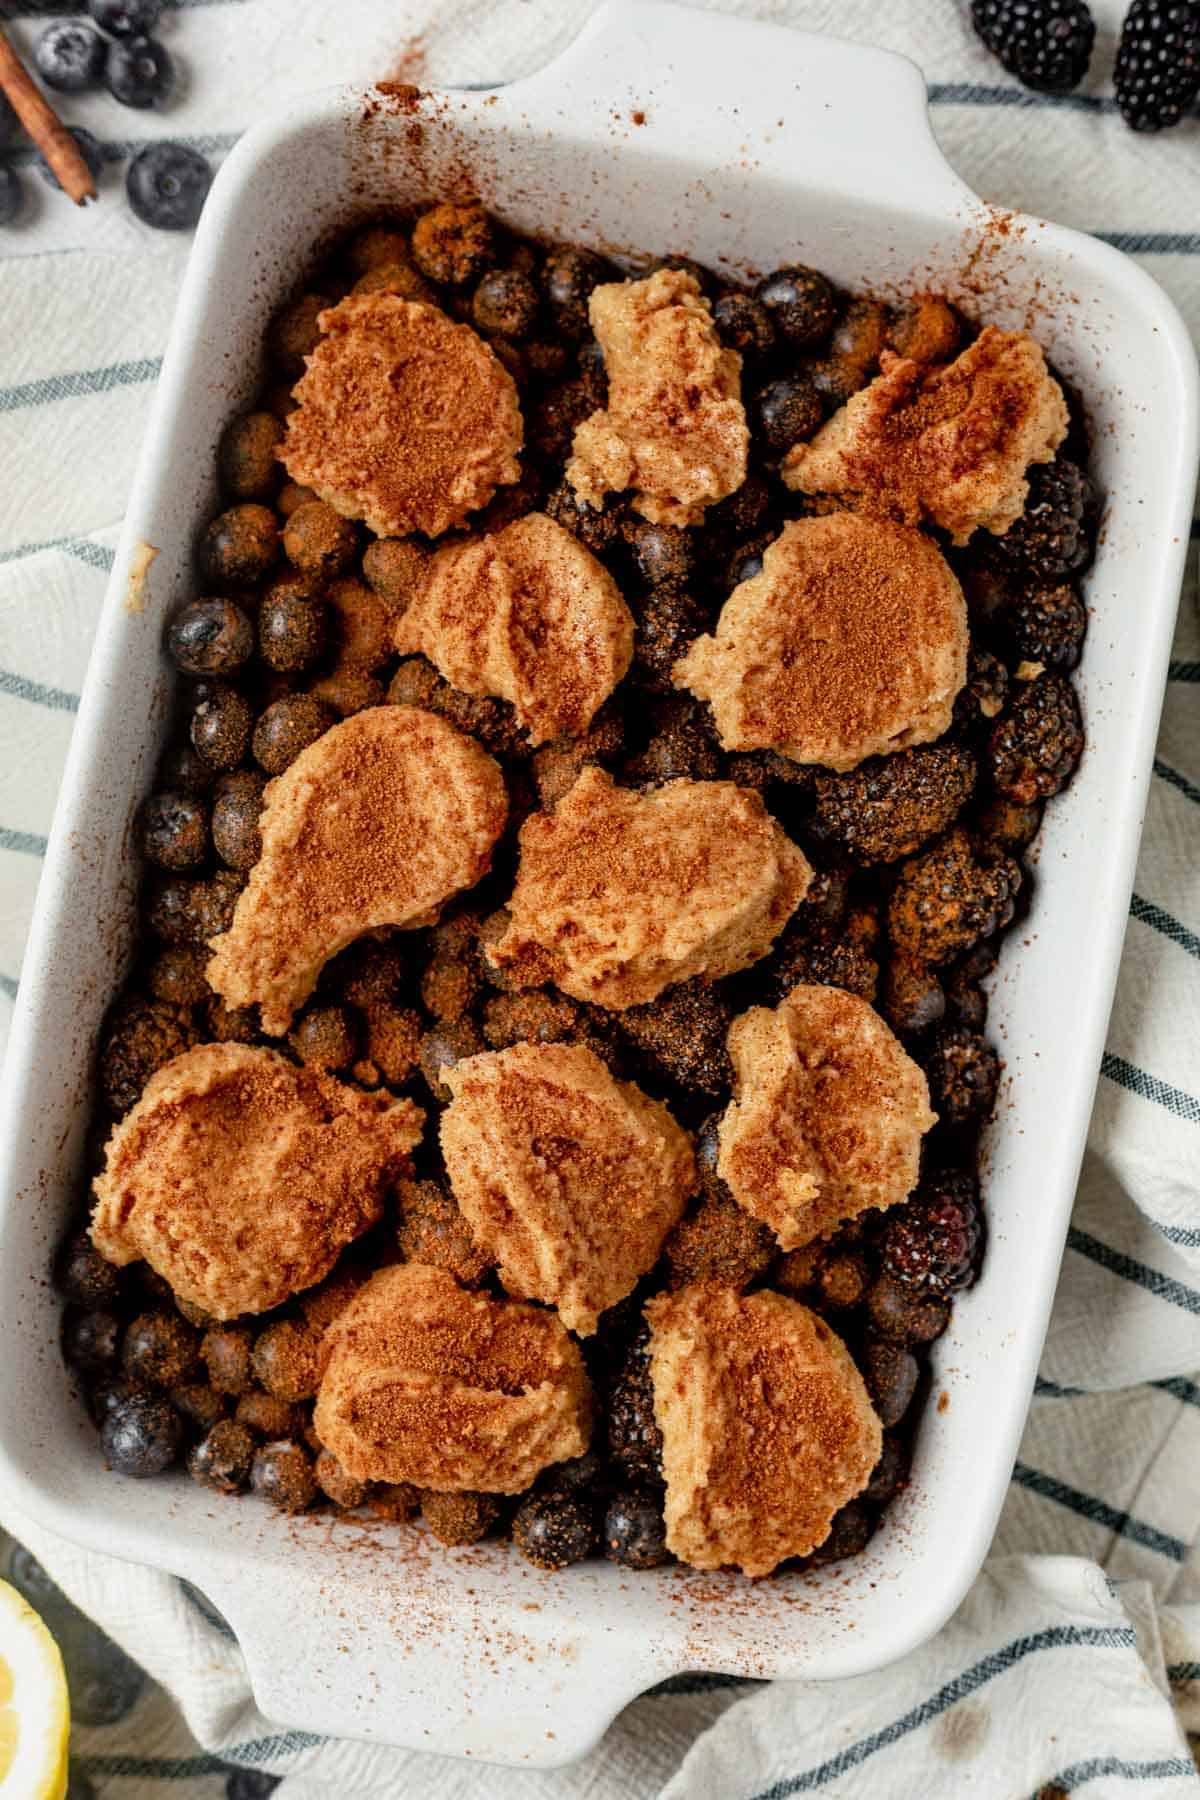 unbaked paleo berry cobbler in a baking dish